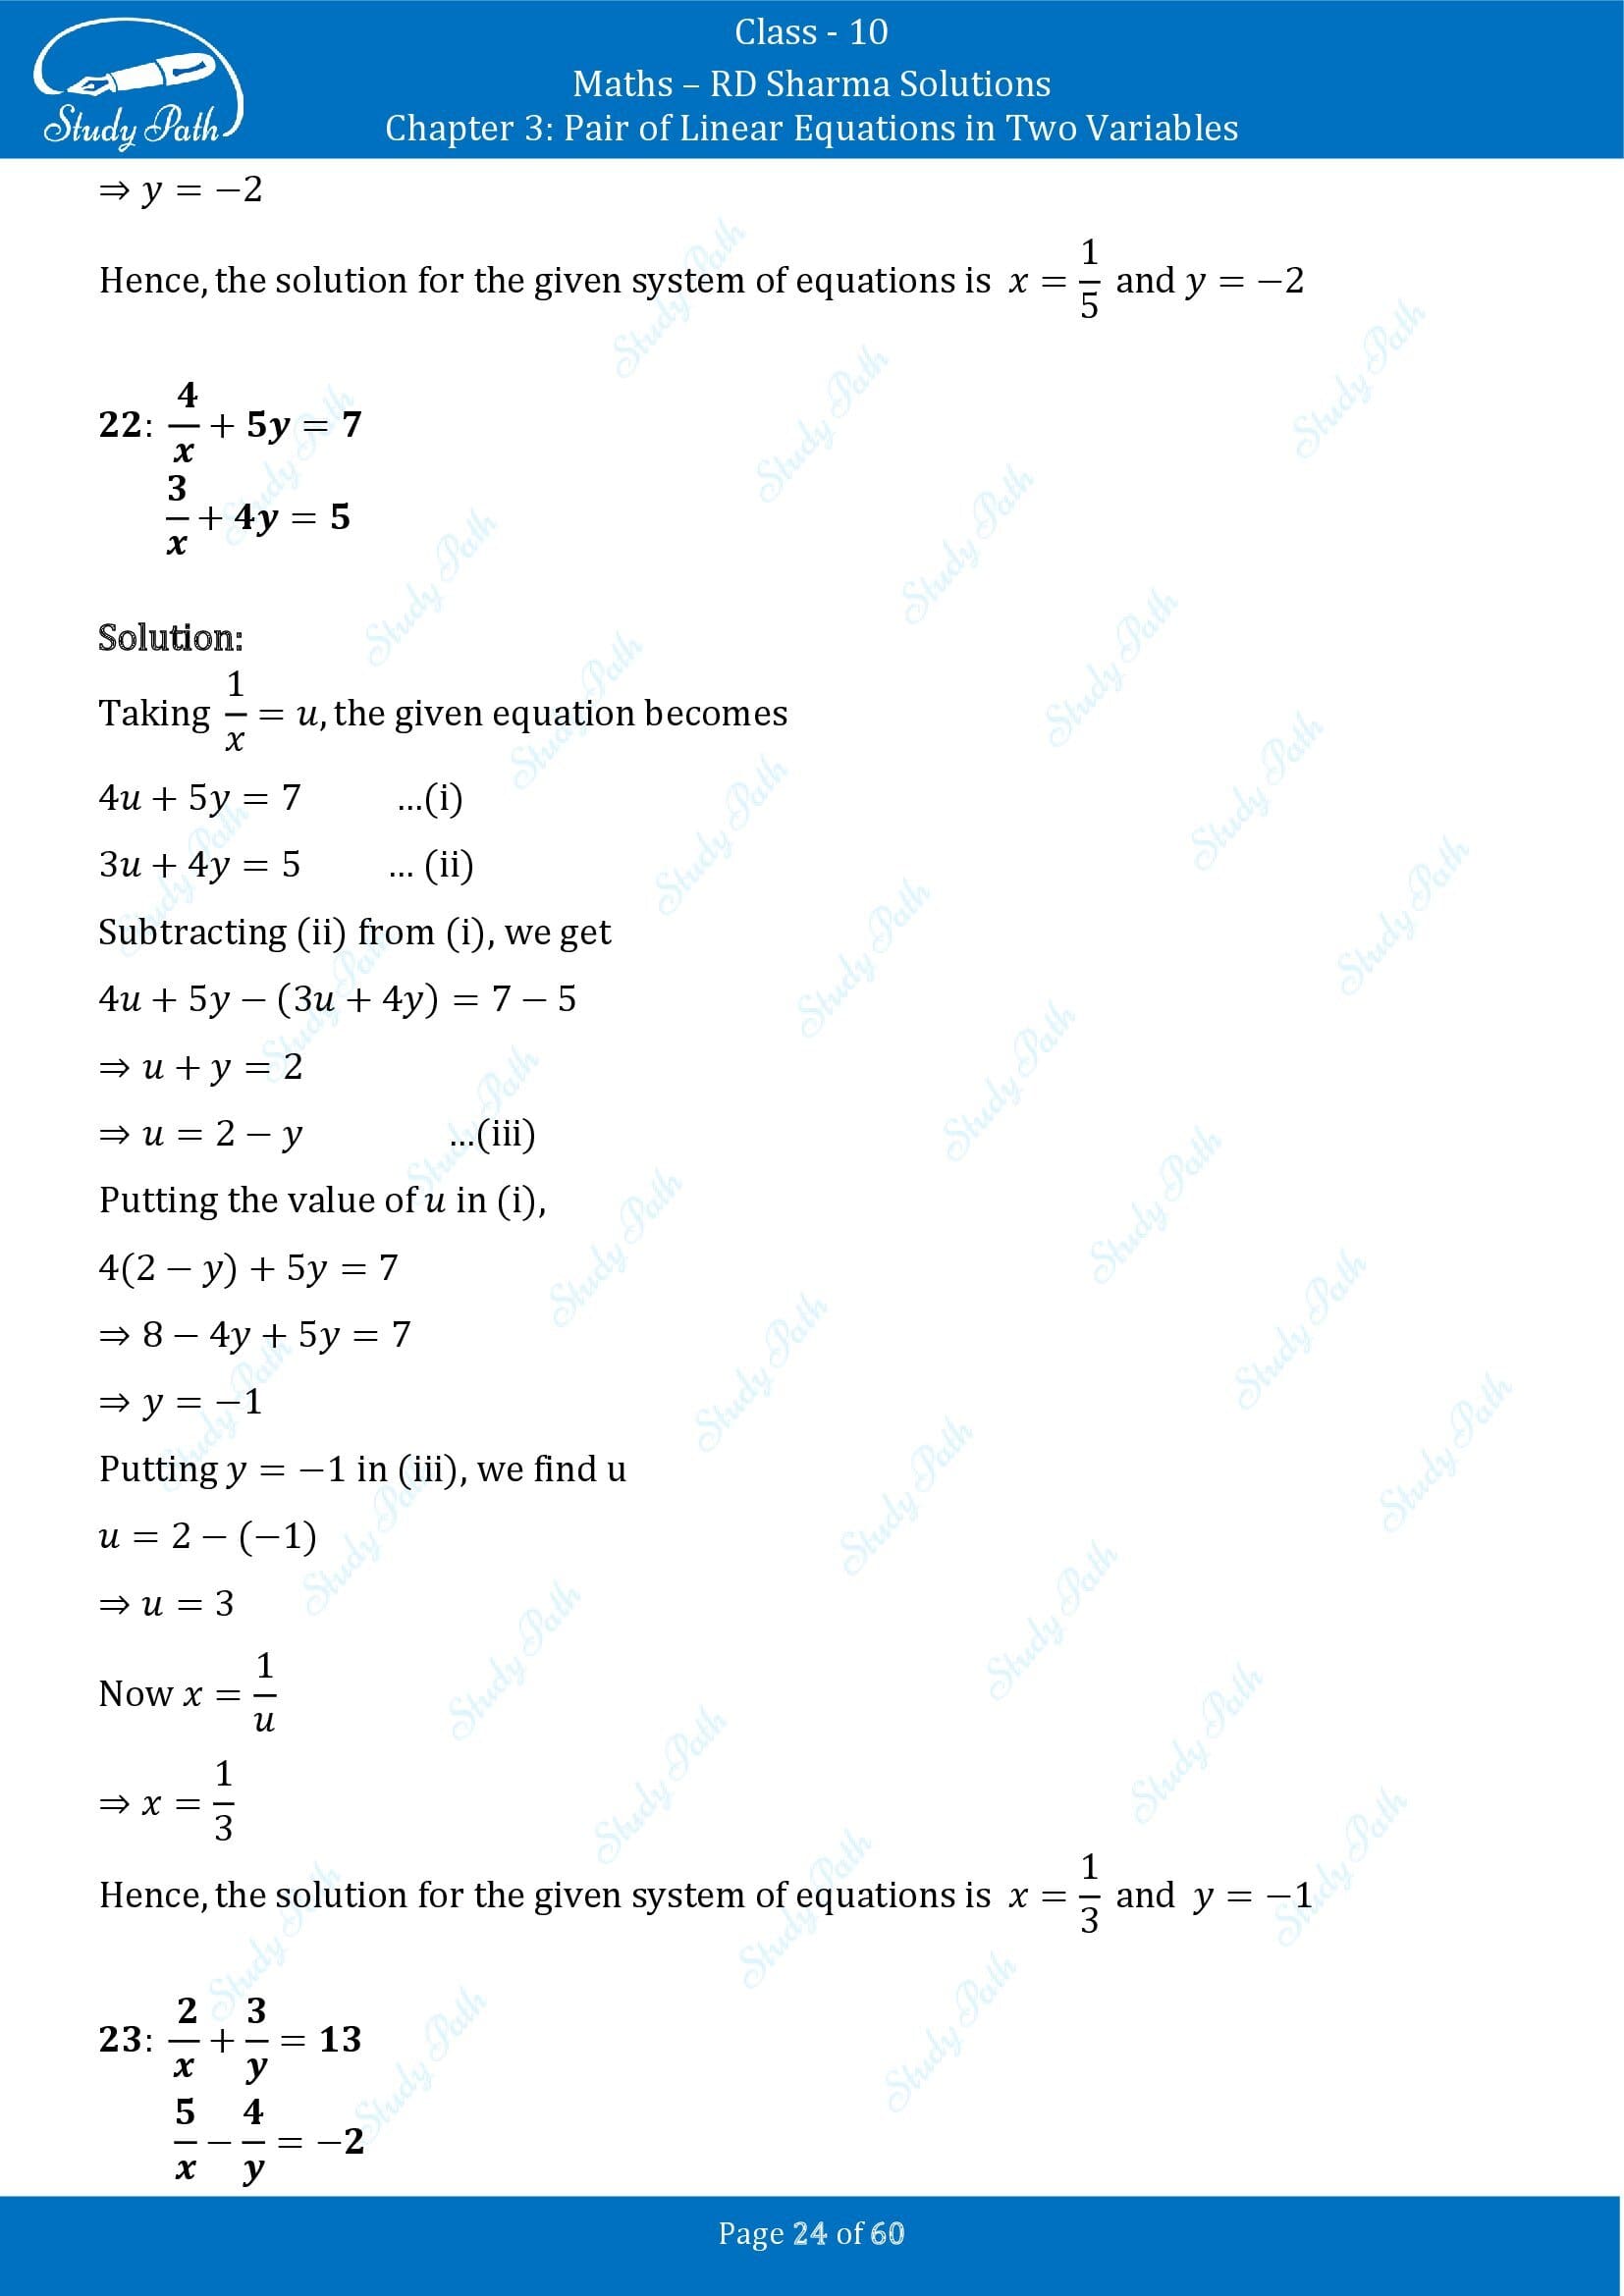 RD Sharma Solutions Class 10 Chapter 3 Pair of Linear Equations in Two Variables Exercise 3.3 00024